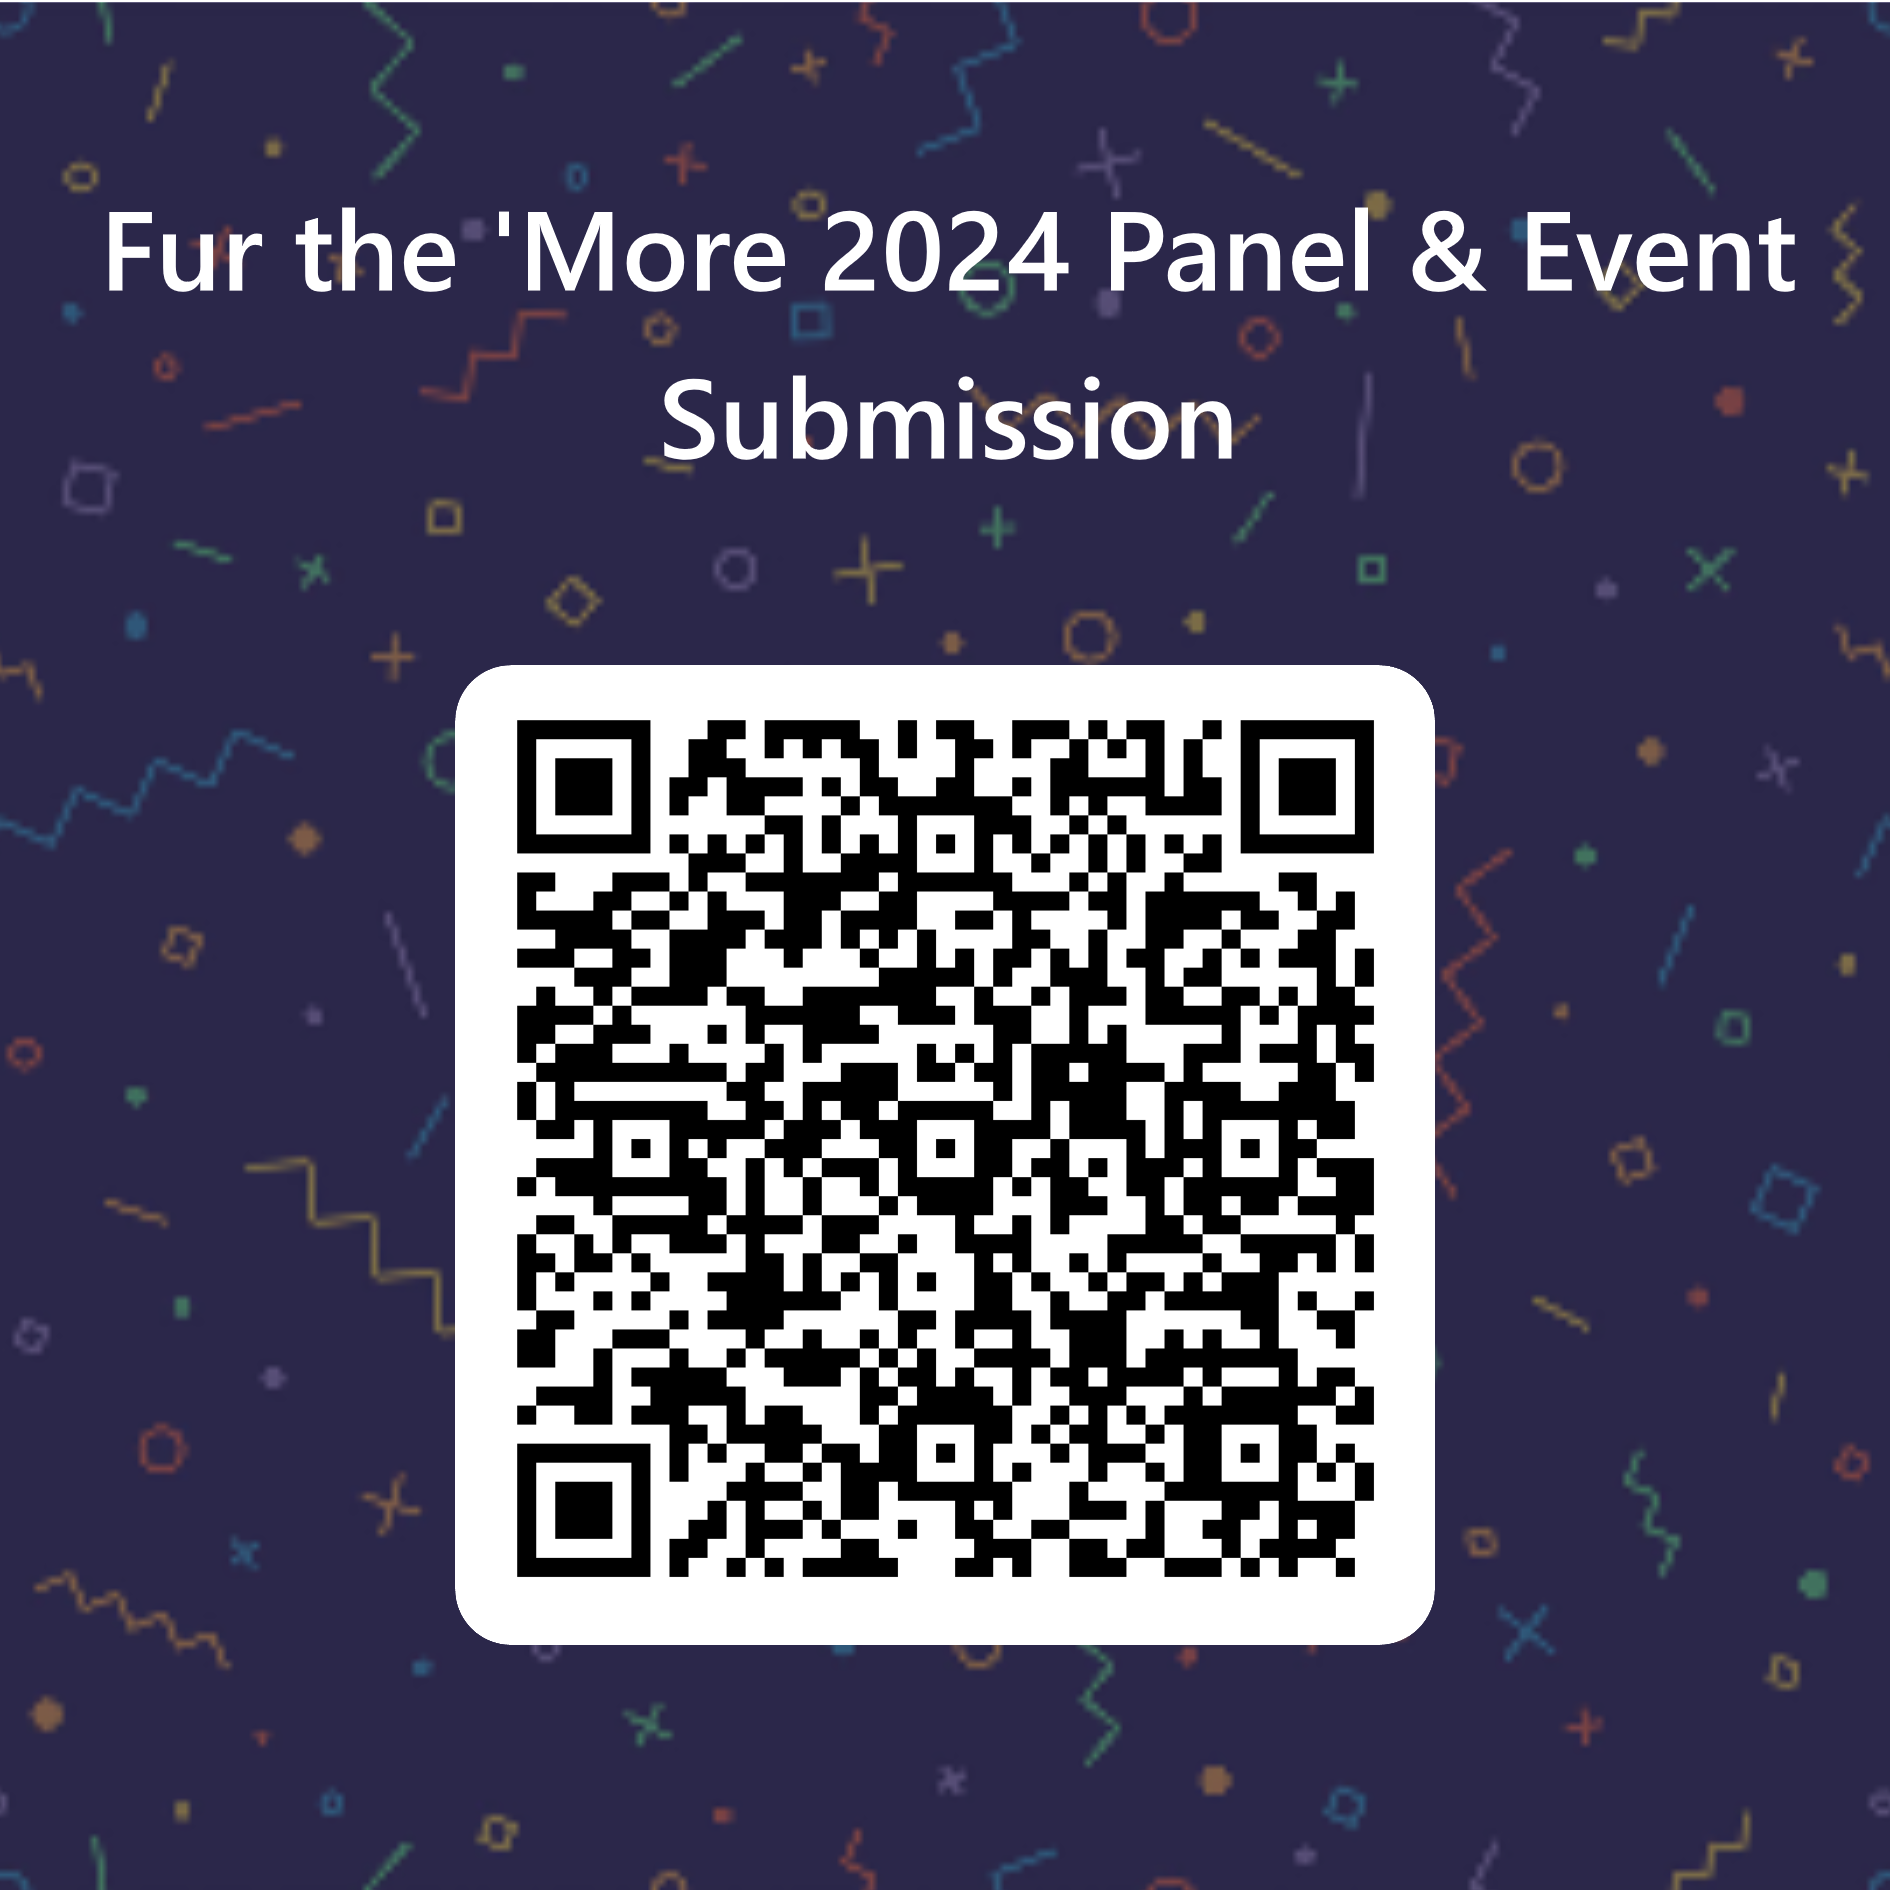 A QR code that links you to our panel submission form. The link text is within the post as well.